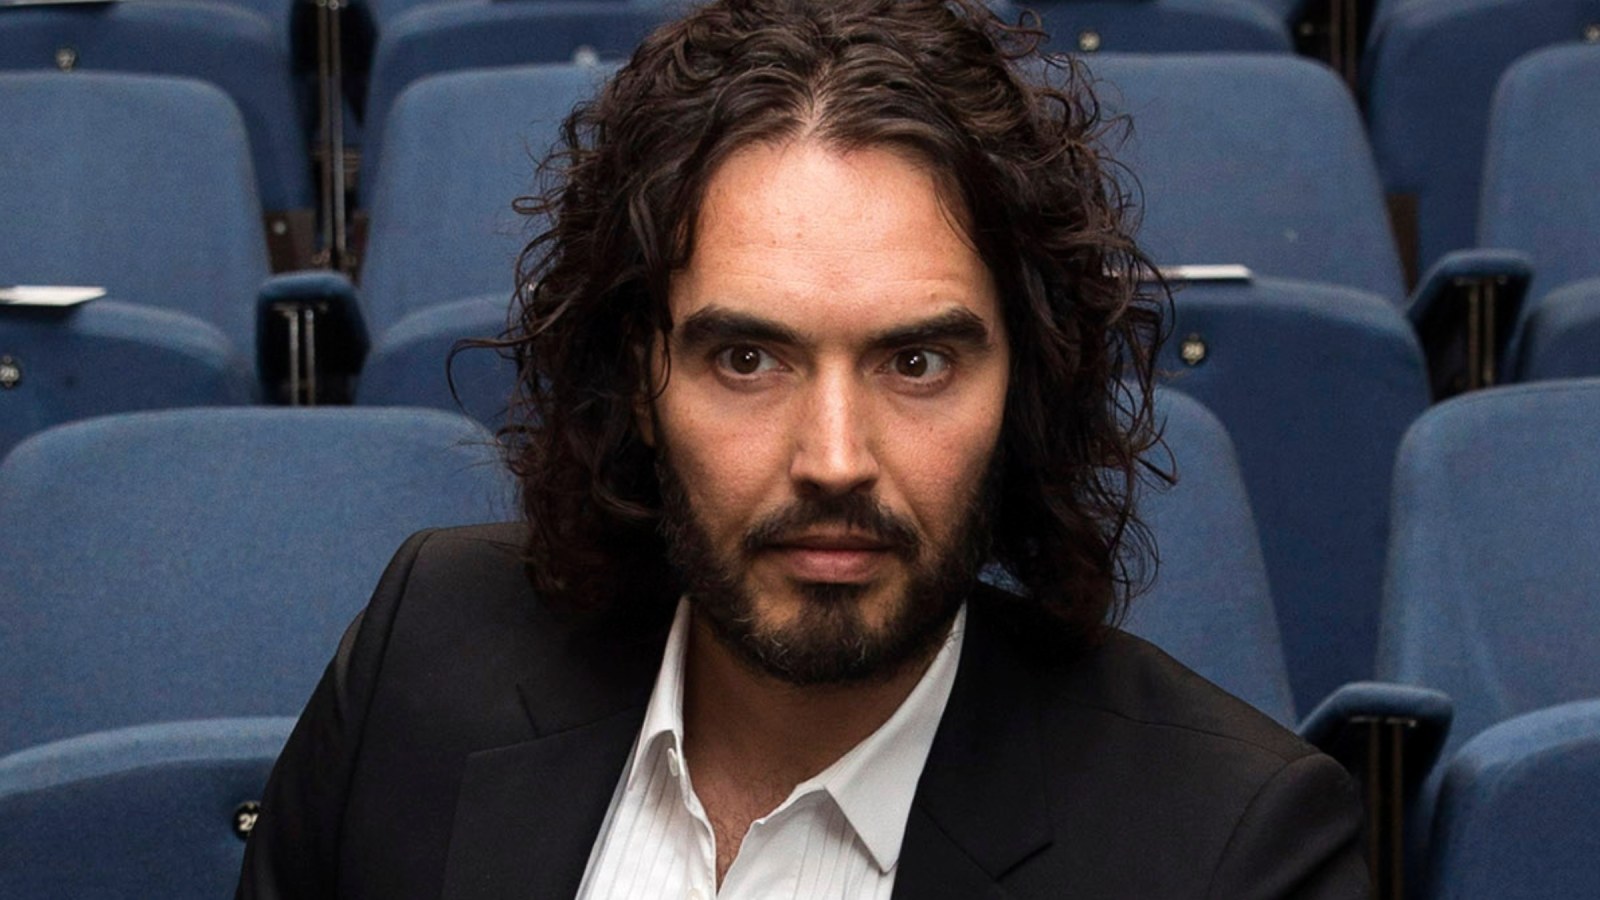 Russell Brand: The timeline of rape and sexual assault allegations